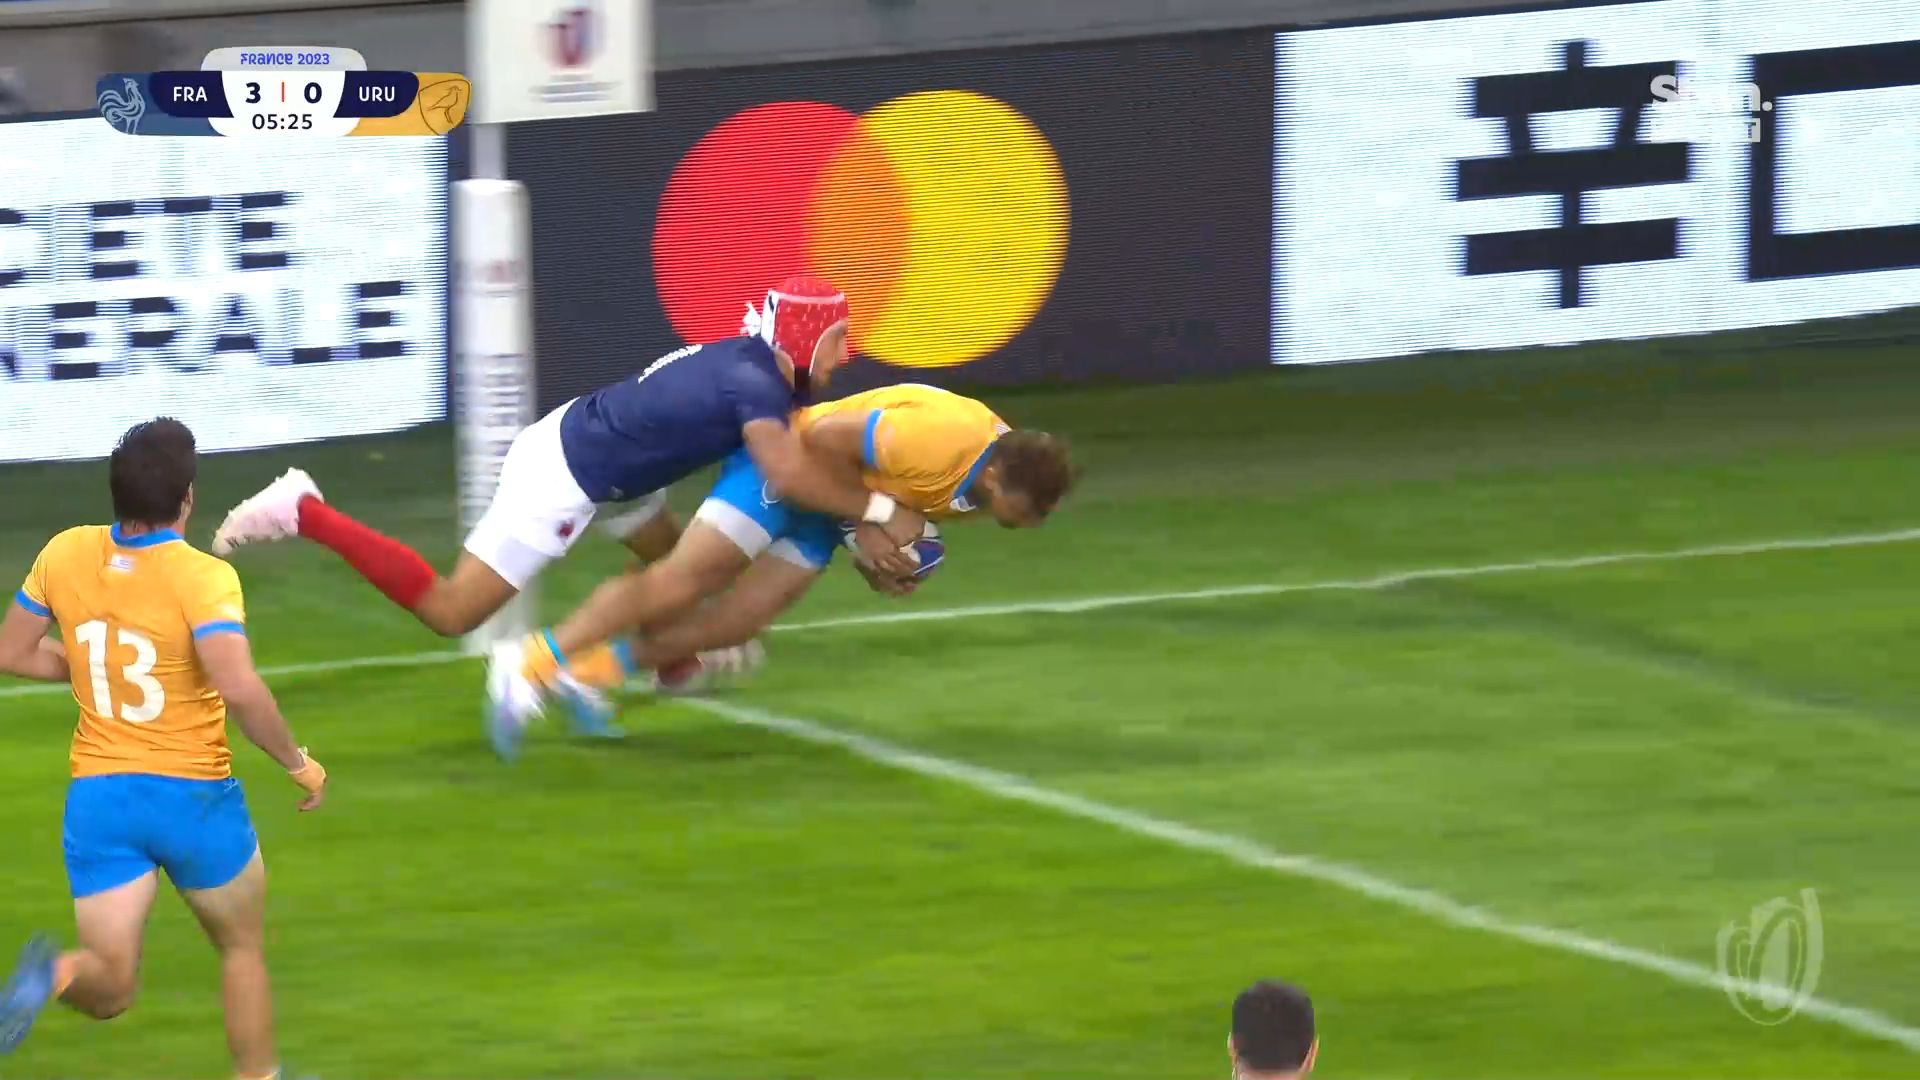 Rugby World Cup highlights: The moment that scuppered Uruguay's hopes of all-time upset over France